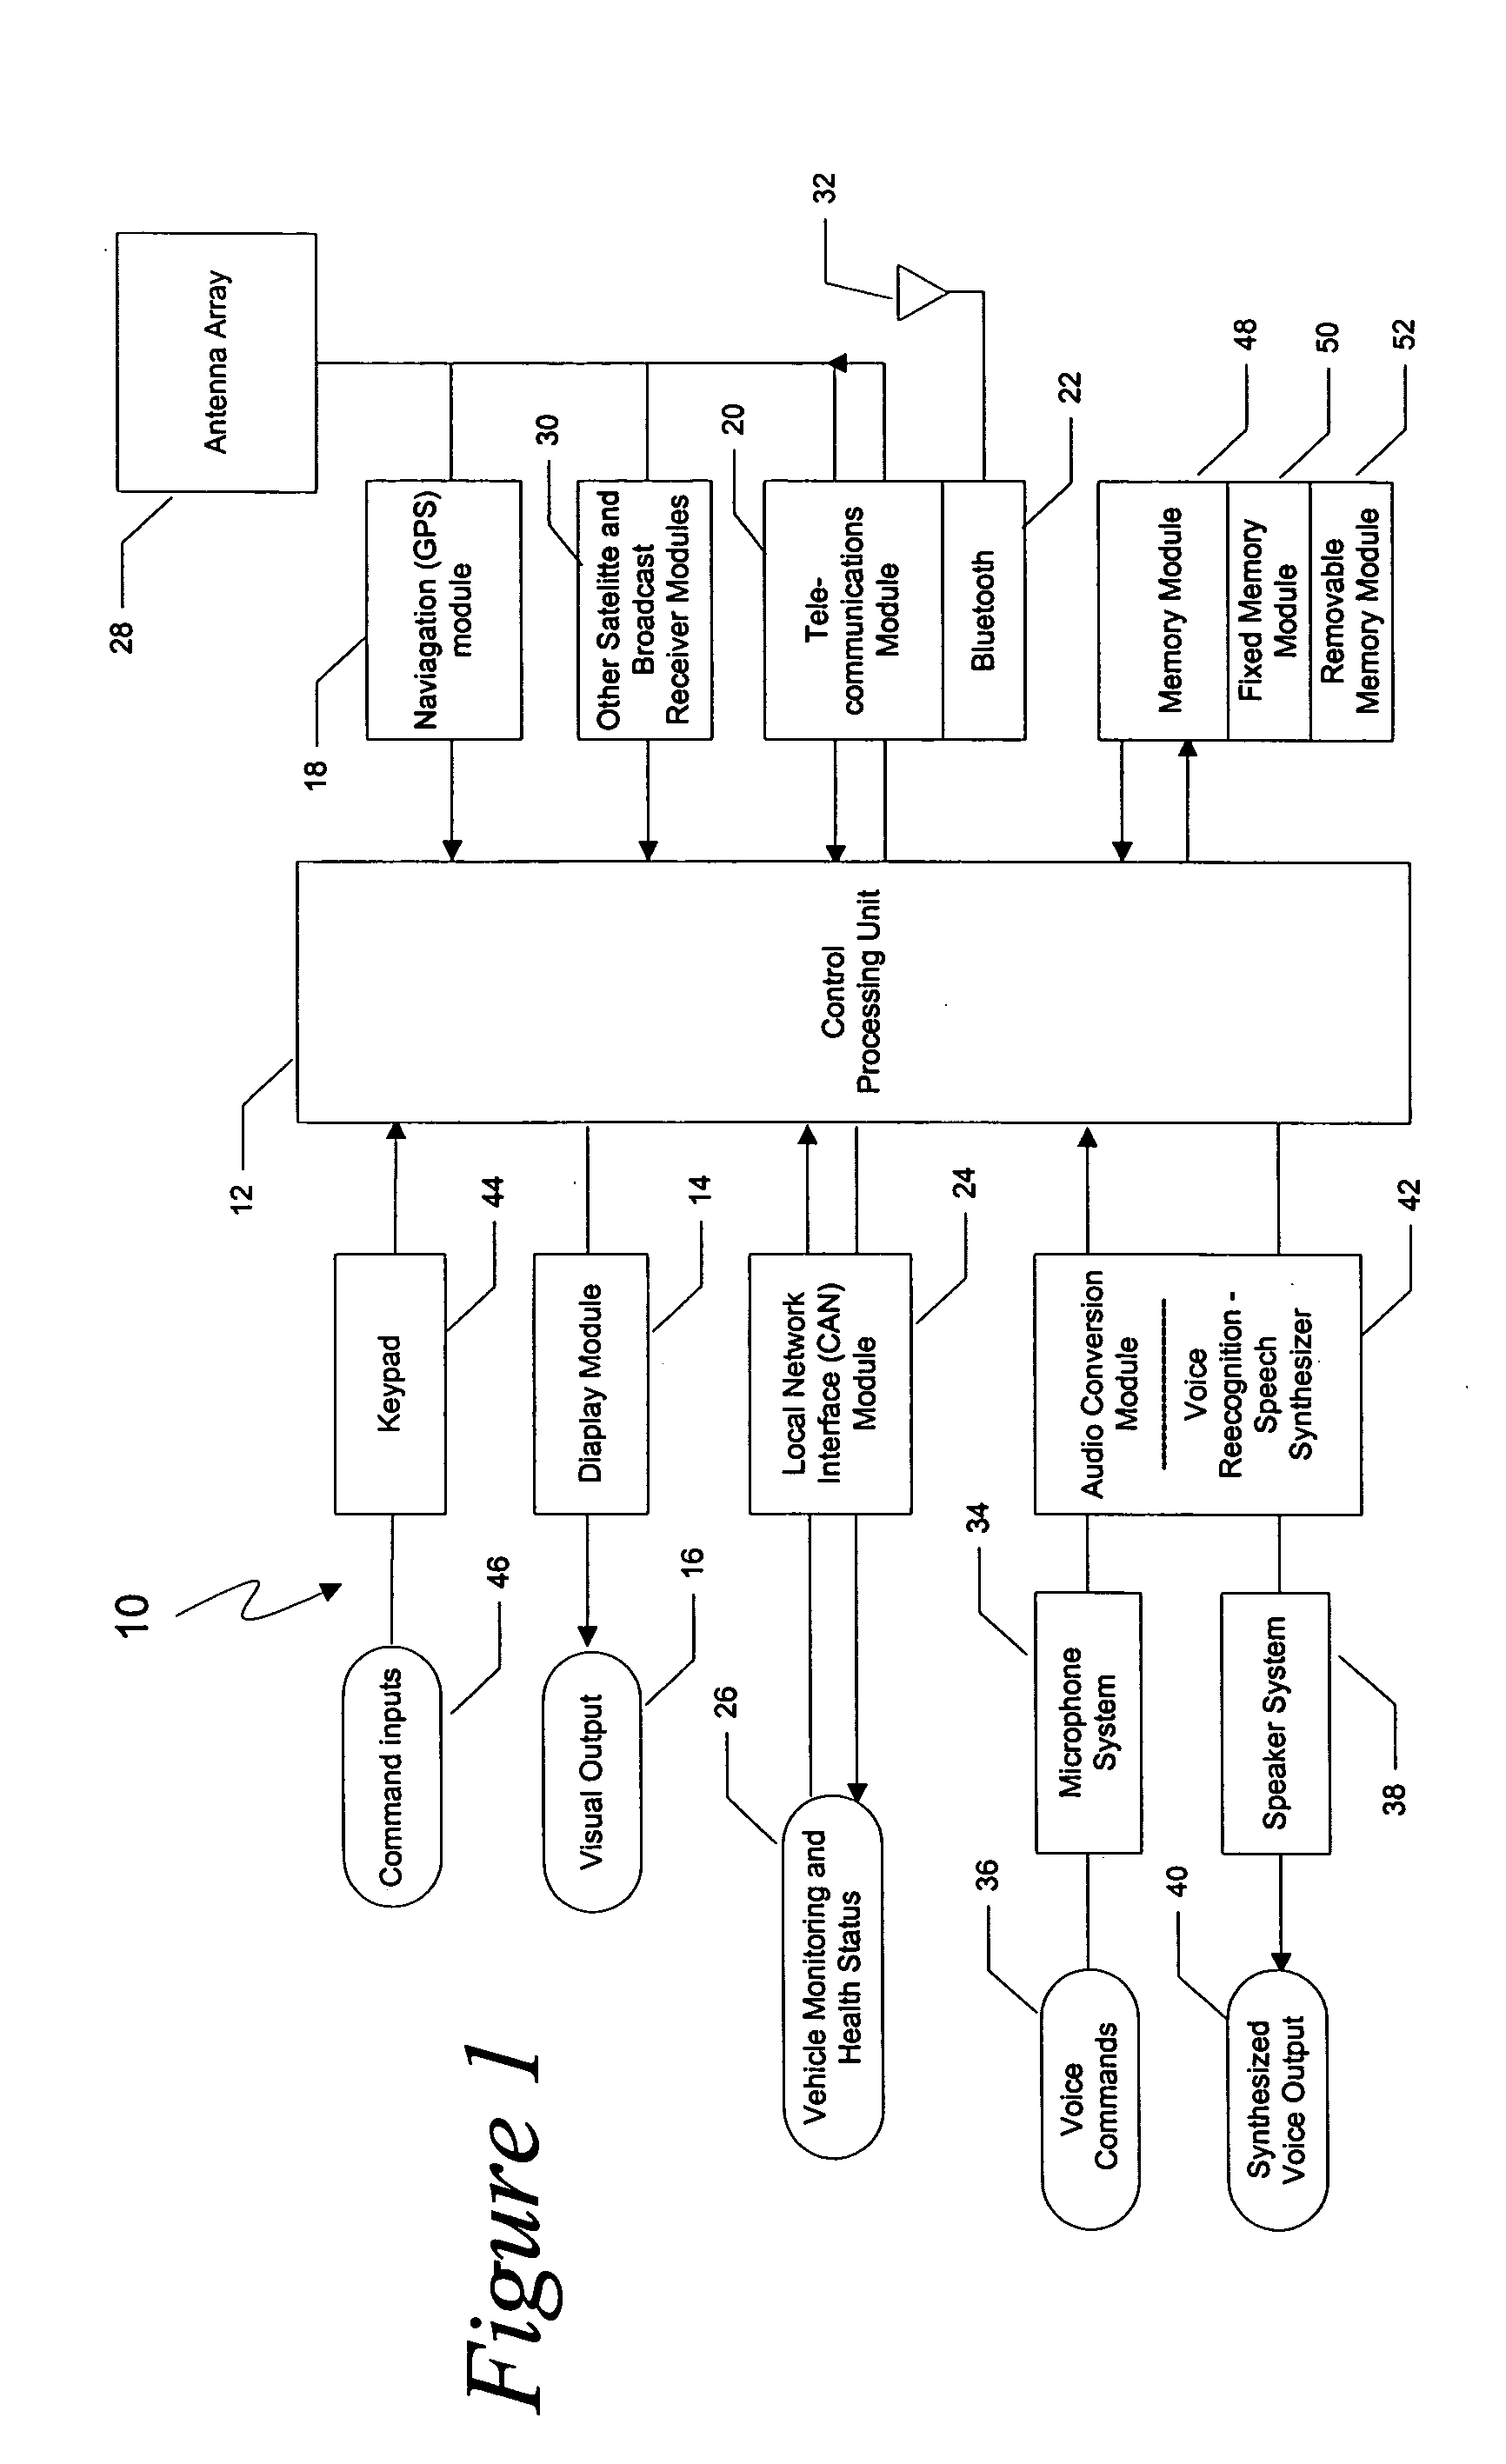 Vehicle information display and communication system having an antenna array